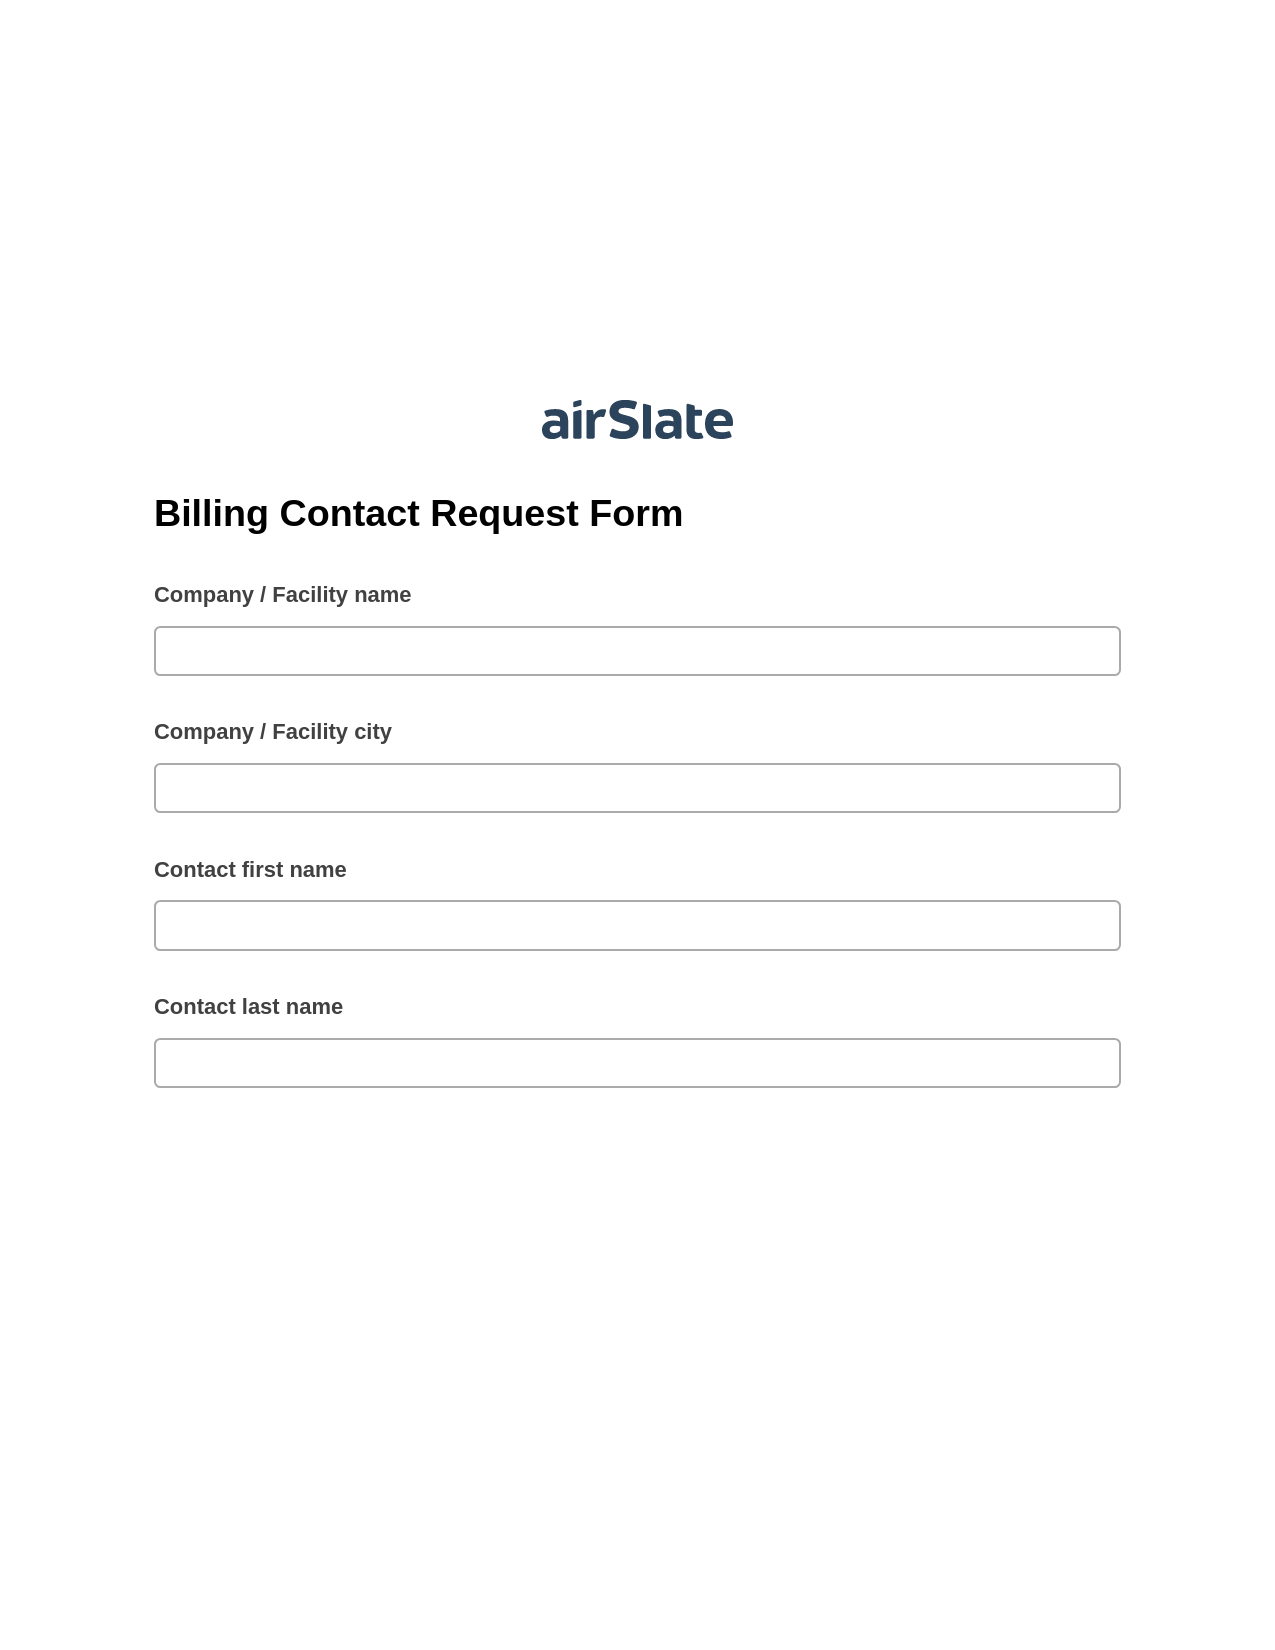 Multirole Billing Contact Request Form Pre-fill from another Slate Bot, Update Salesforce Record Bot, Export to Google Sheet Bot